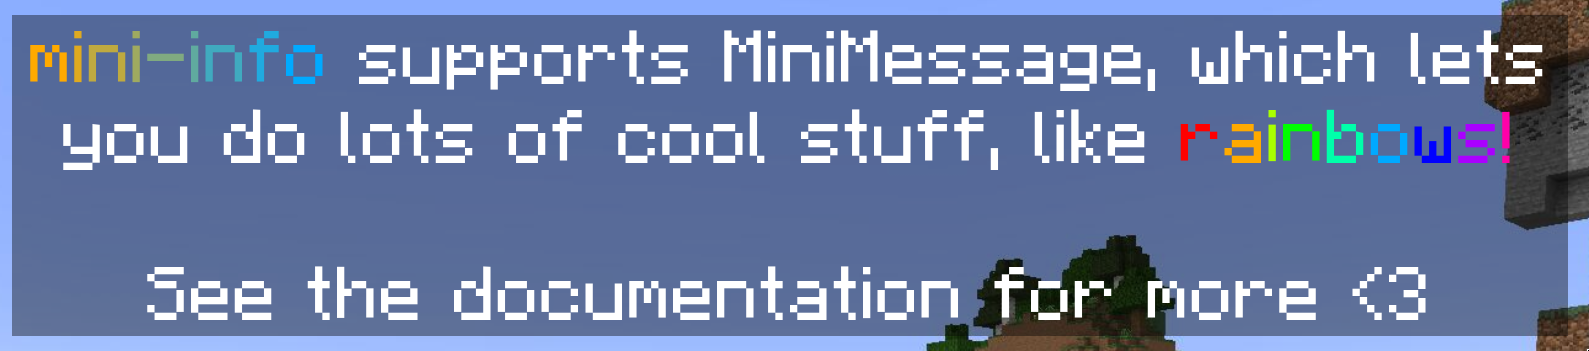 mini-info supports MiniMessage, which lets you do lots of cool stuff, like rainbows! See the documentation for more.